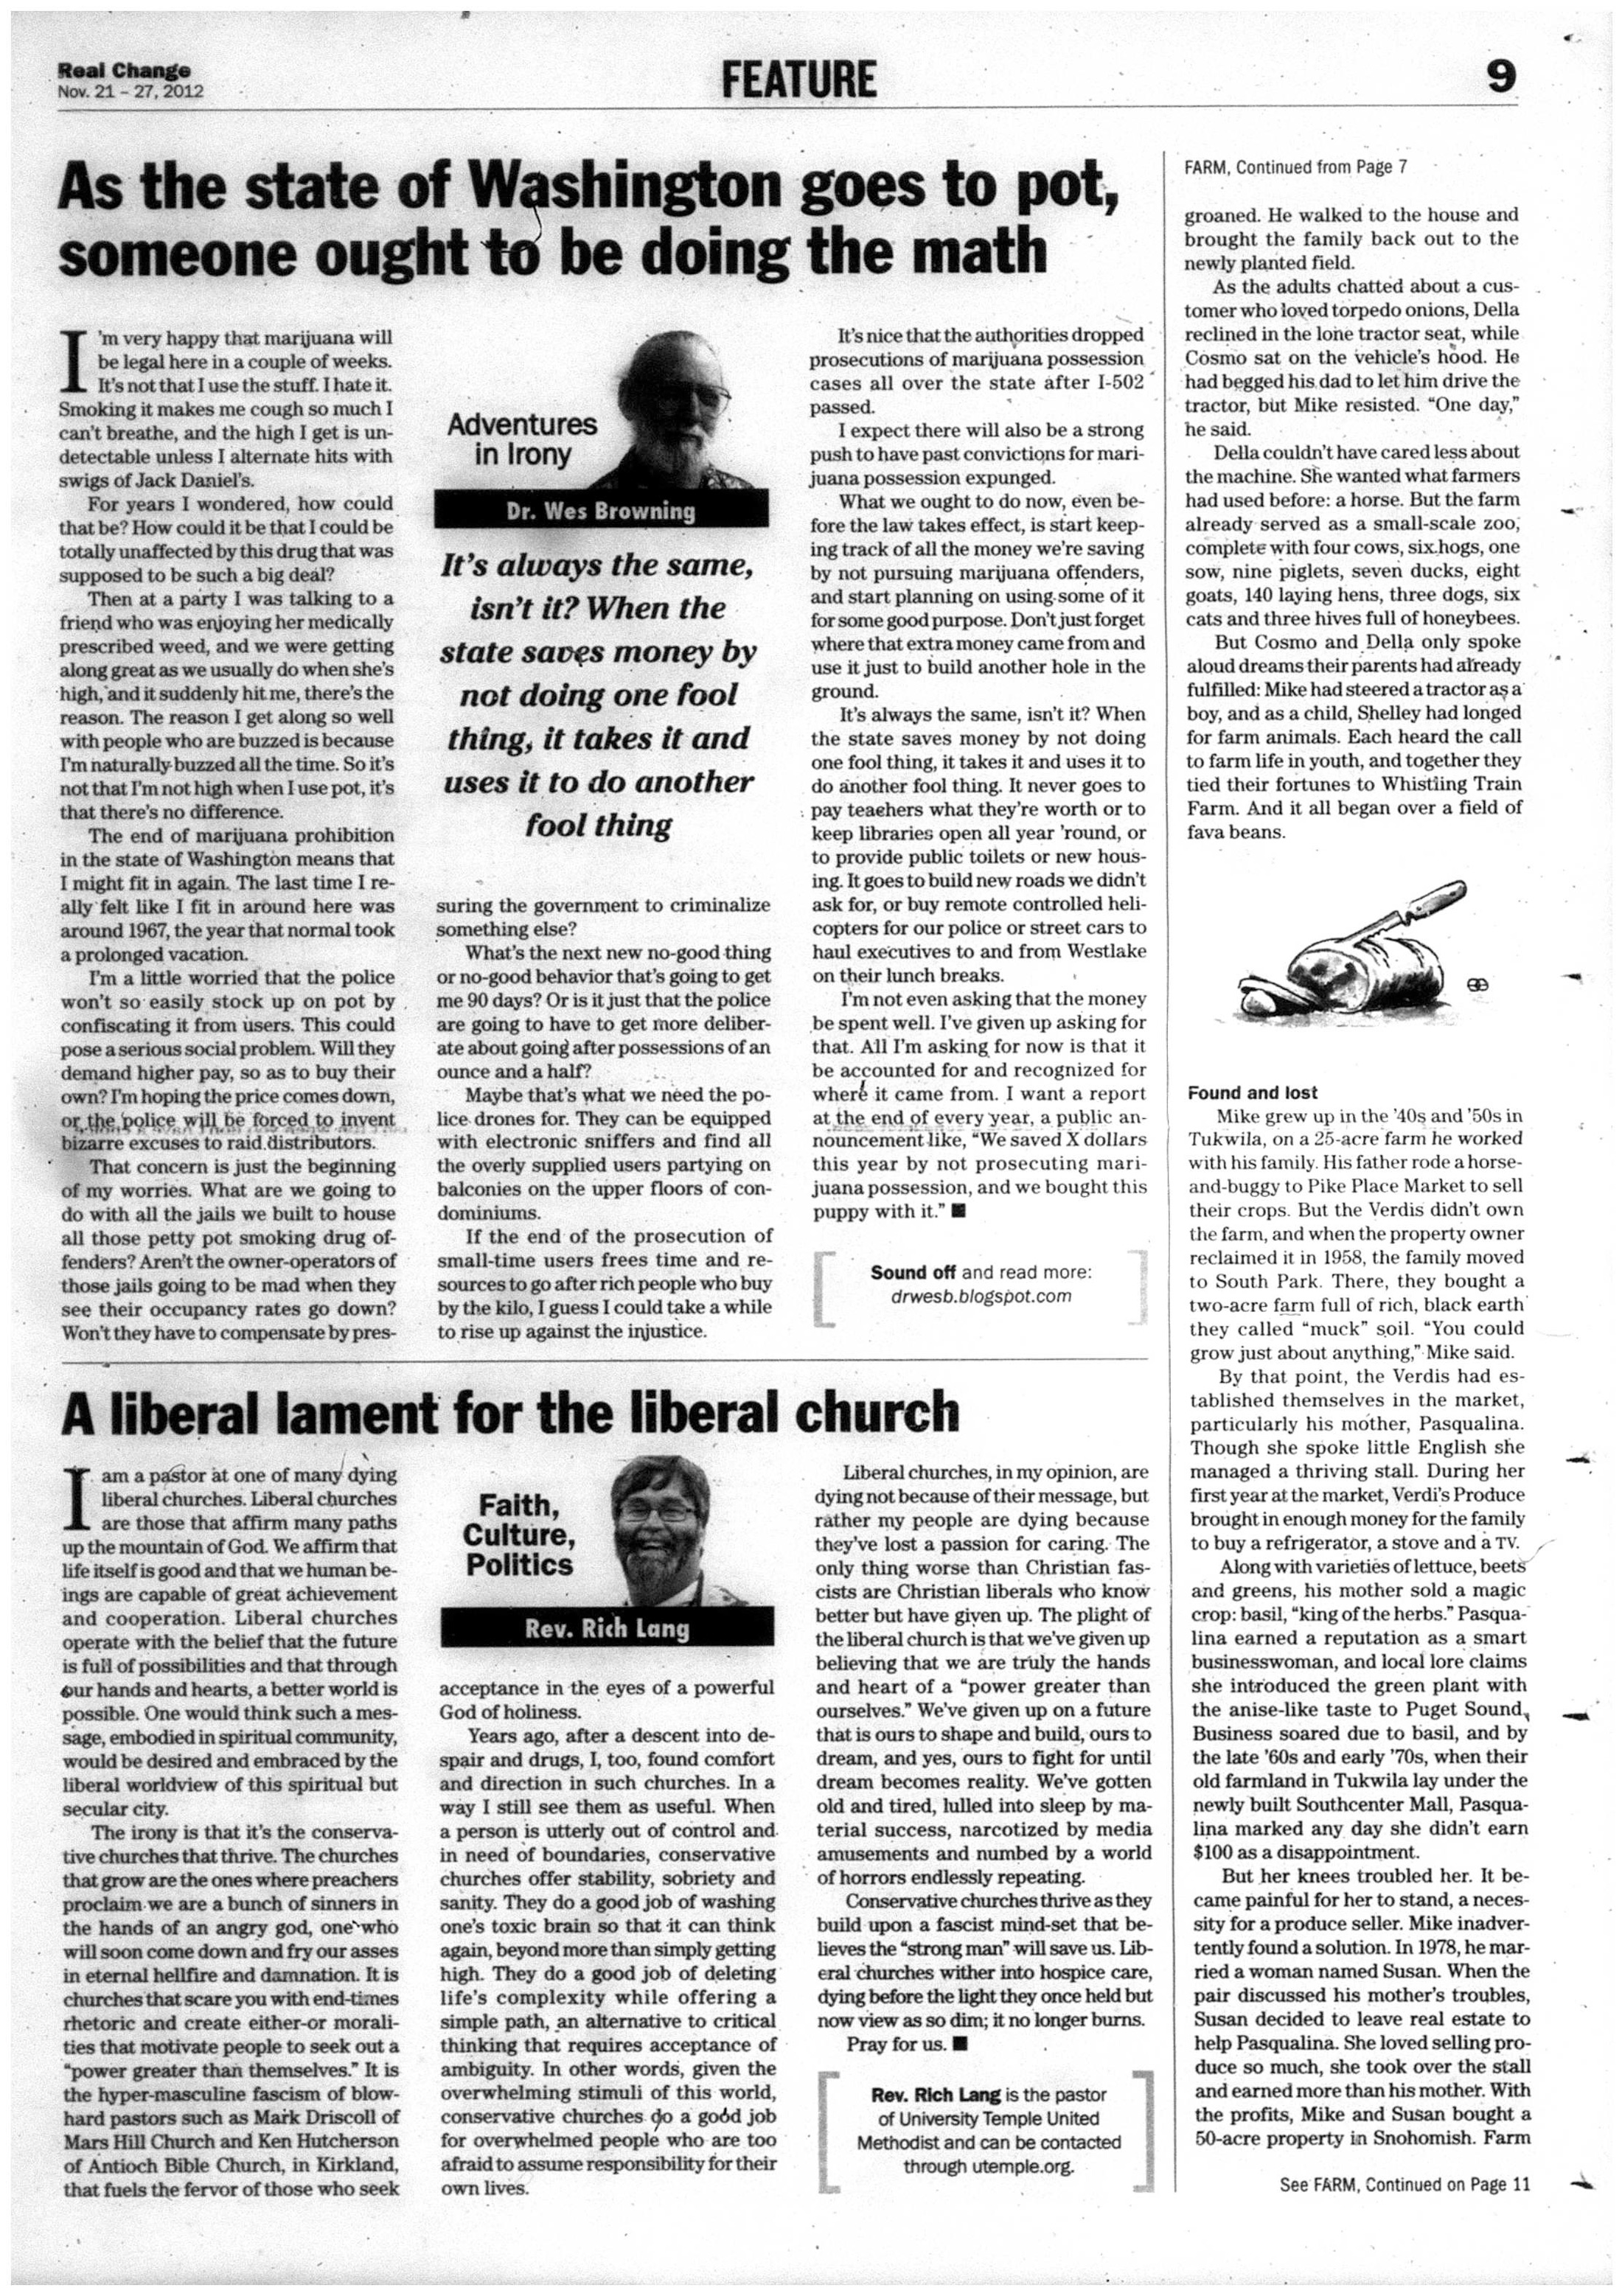 A liberal lament for the liberal church | November 21, 2012 | Real Change